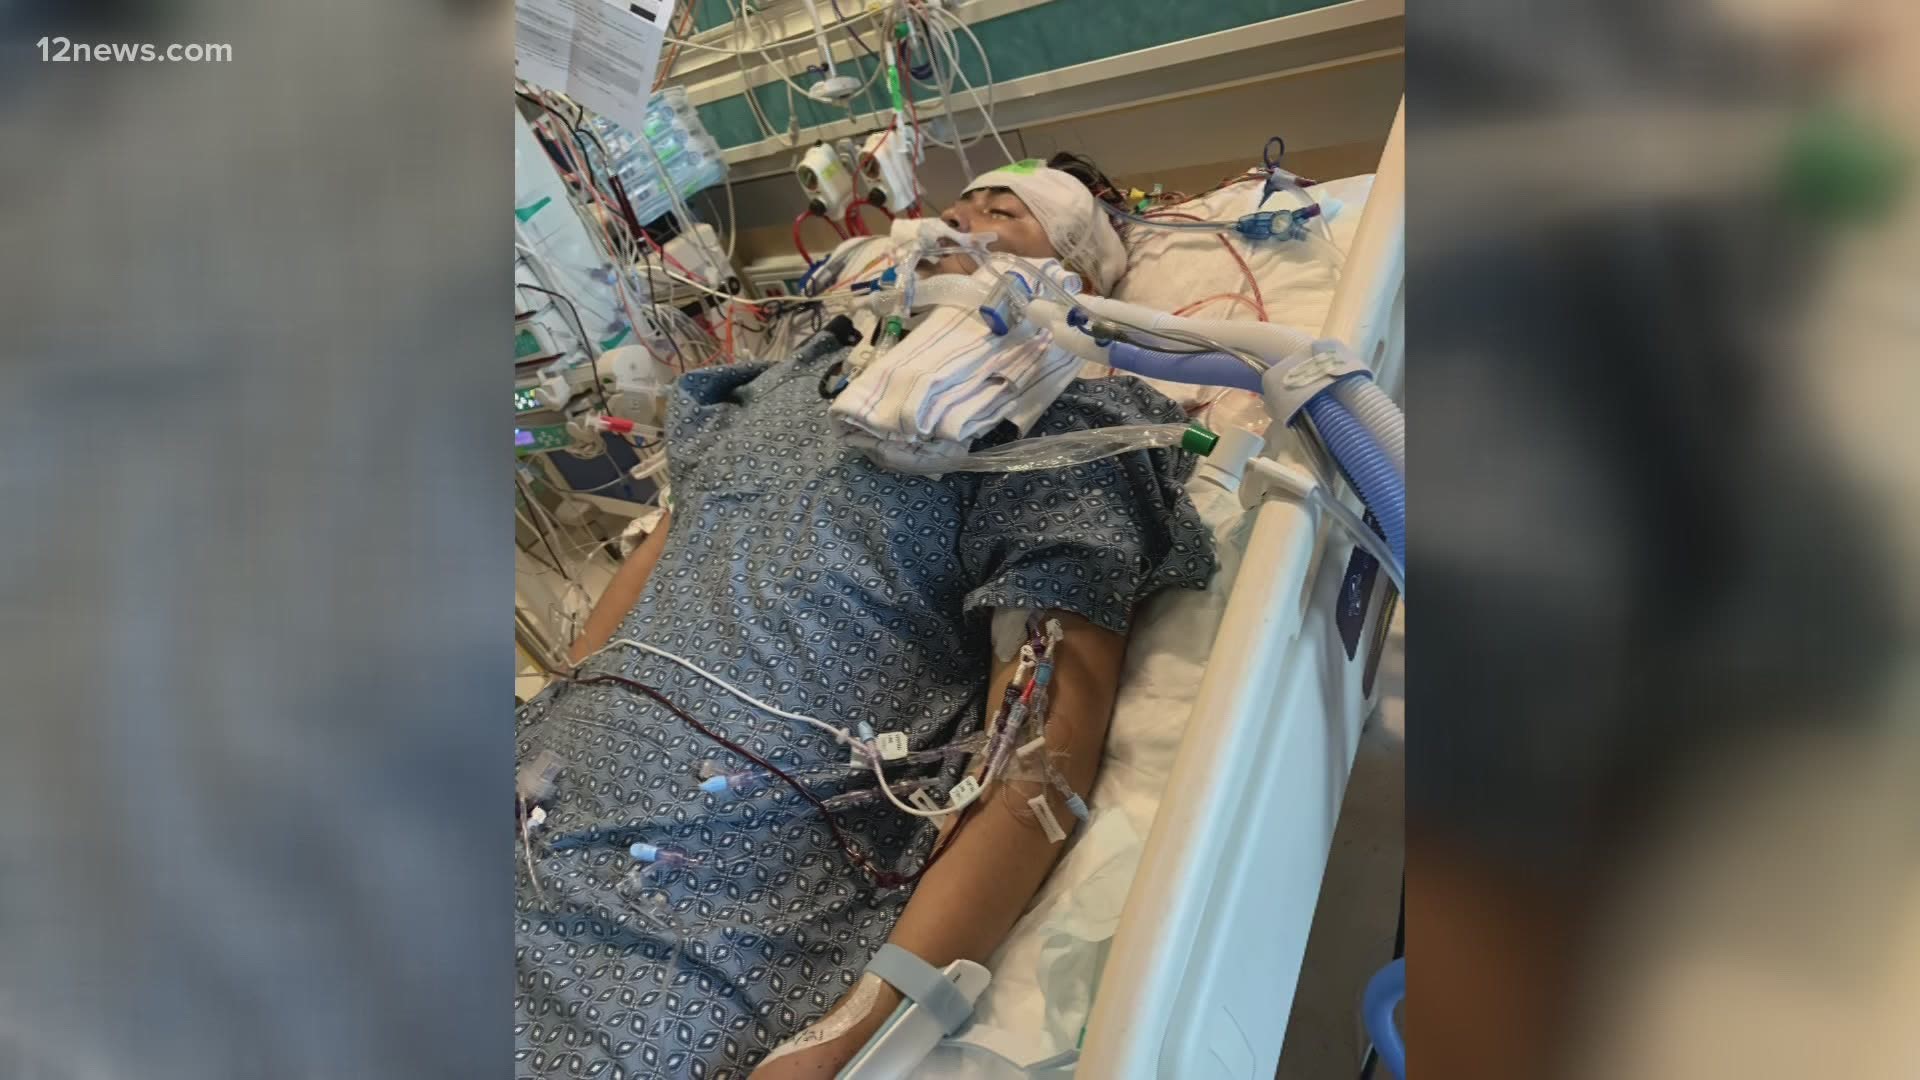 Eric Reyes is just 17 years old and he’s now fighting for his life in a hospital after an ATV accident, and his family is clinging to hope that he’ll recover.